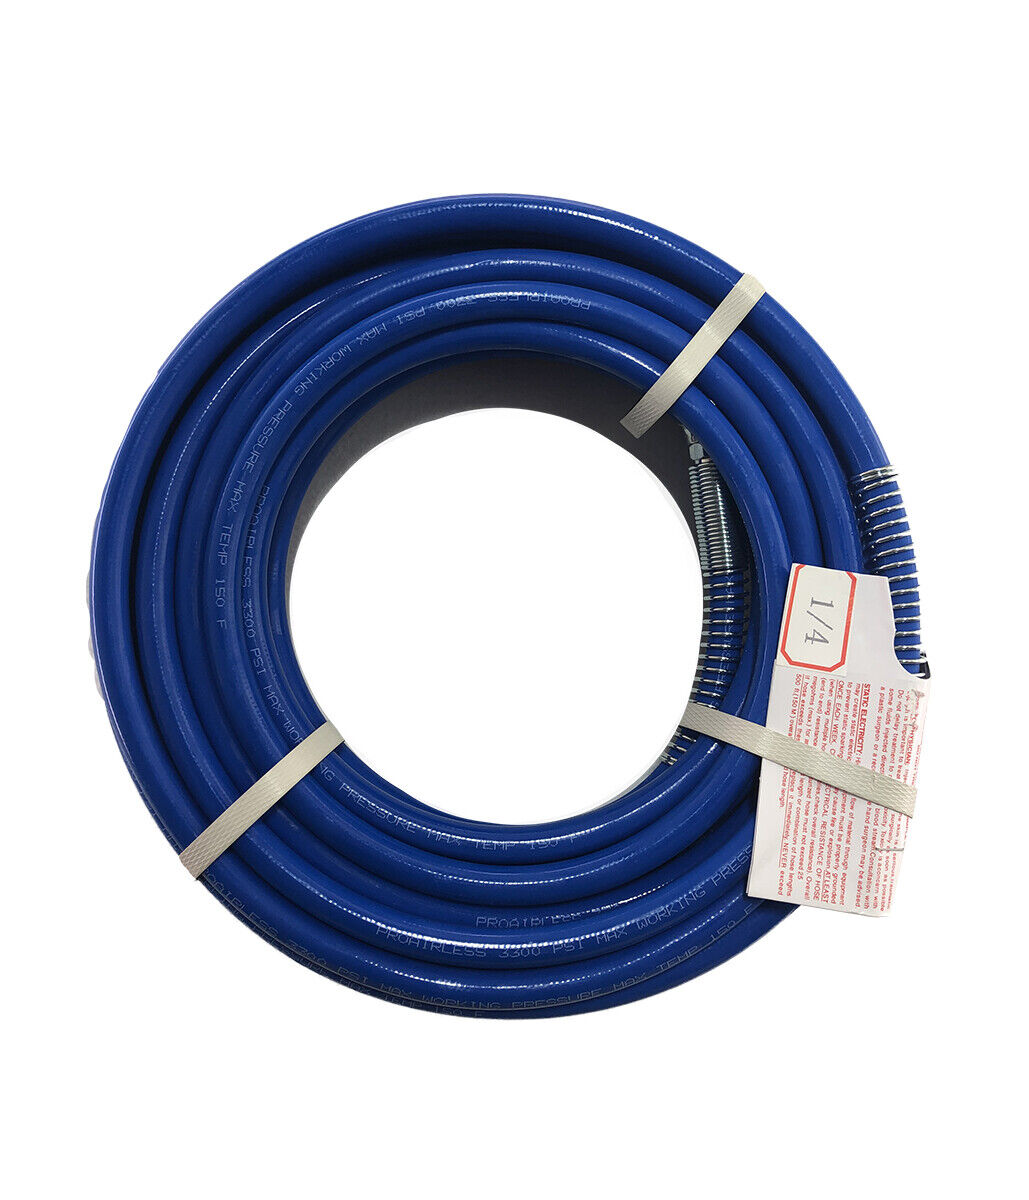 PROVENPART Pp50161-50 1/4 inch High-Pressure Spray Hose 50' Length 50 Foot Airless Paint Sprayer Hose 1/4 inch Hose Max PSI 3300 Supplied with 1/4 NPS